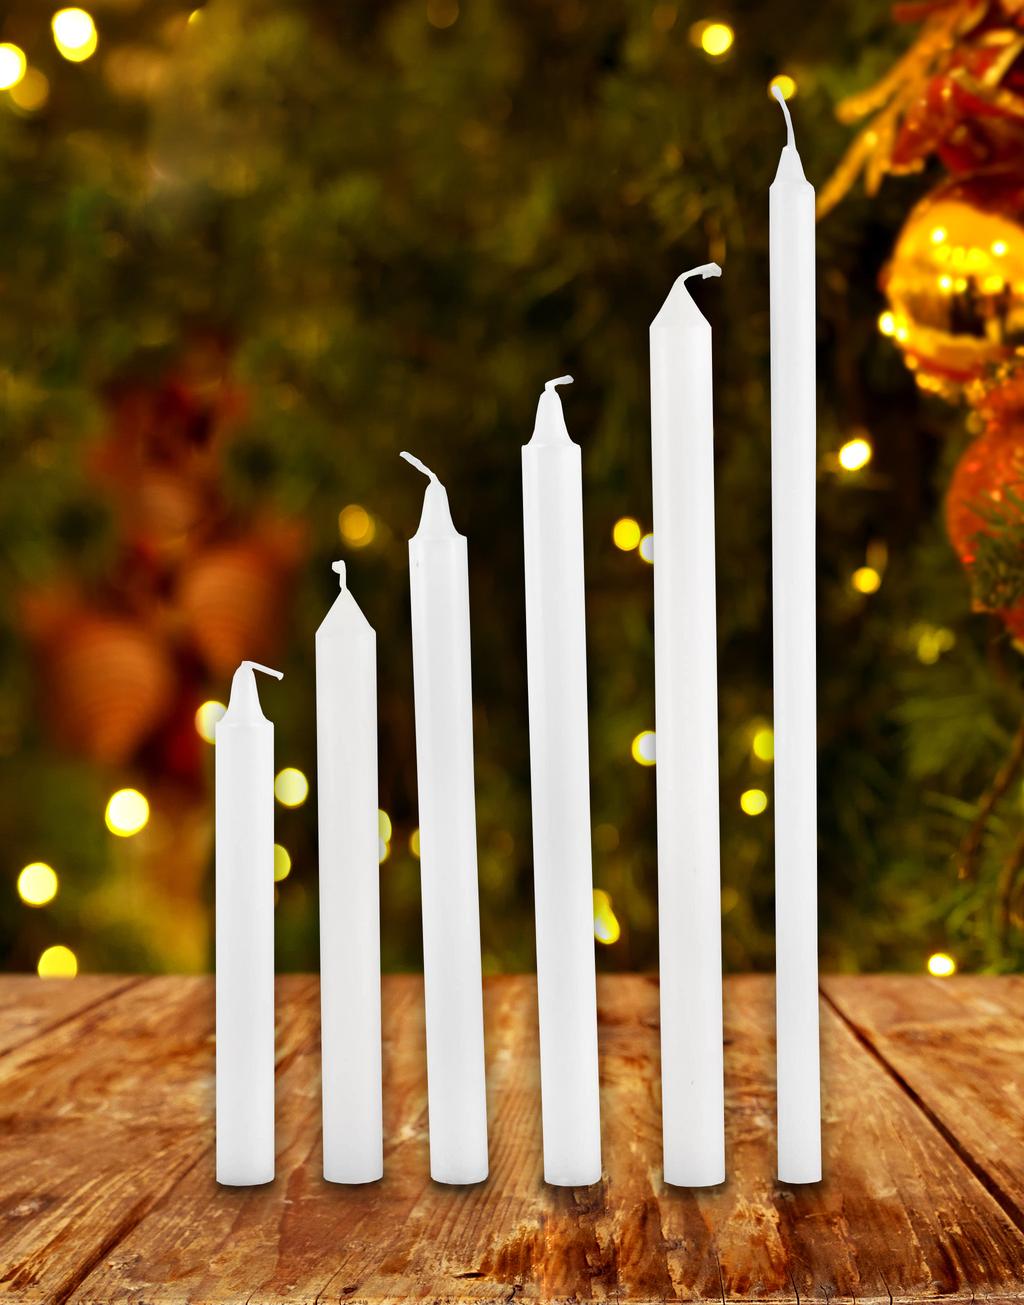 HOW TO CHOOSE A CANDLE CANDLELIGHT BUYER S GUIDE 1 2 Service Length Determine how long you expect your candlelight service or vigil to last. Longer candles are recommended for longer services.